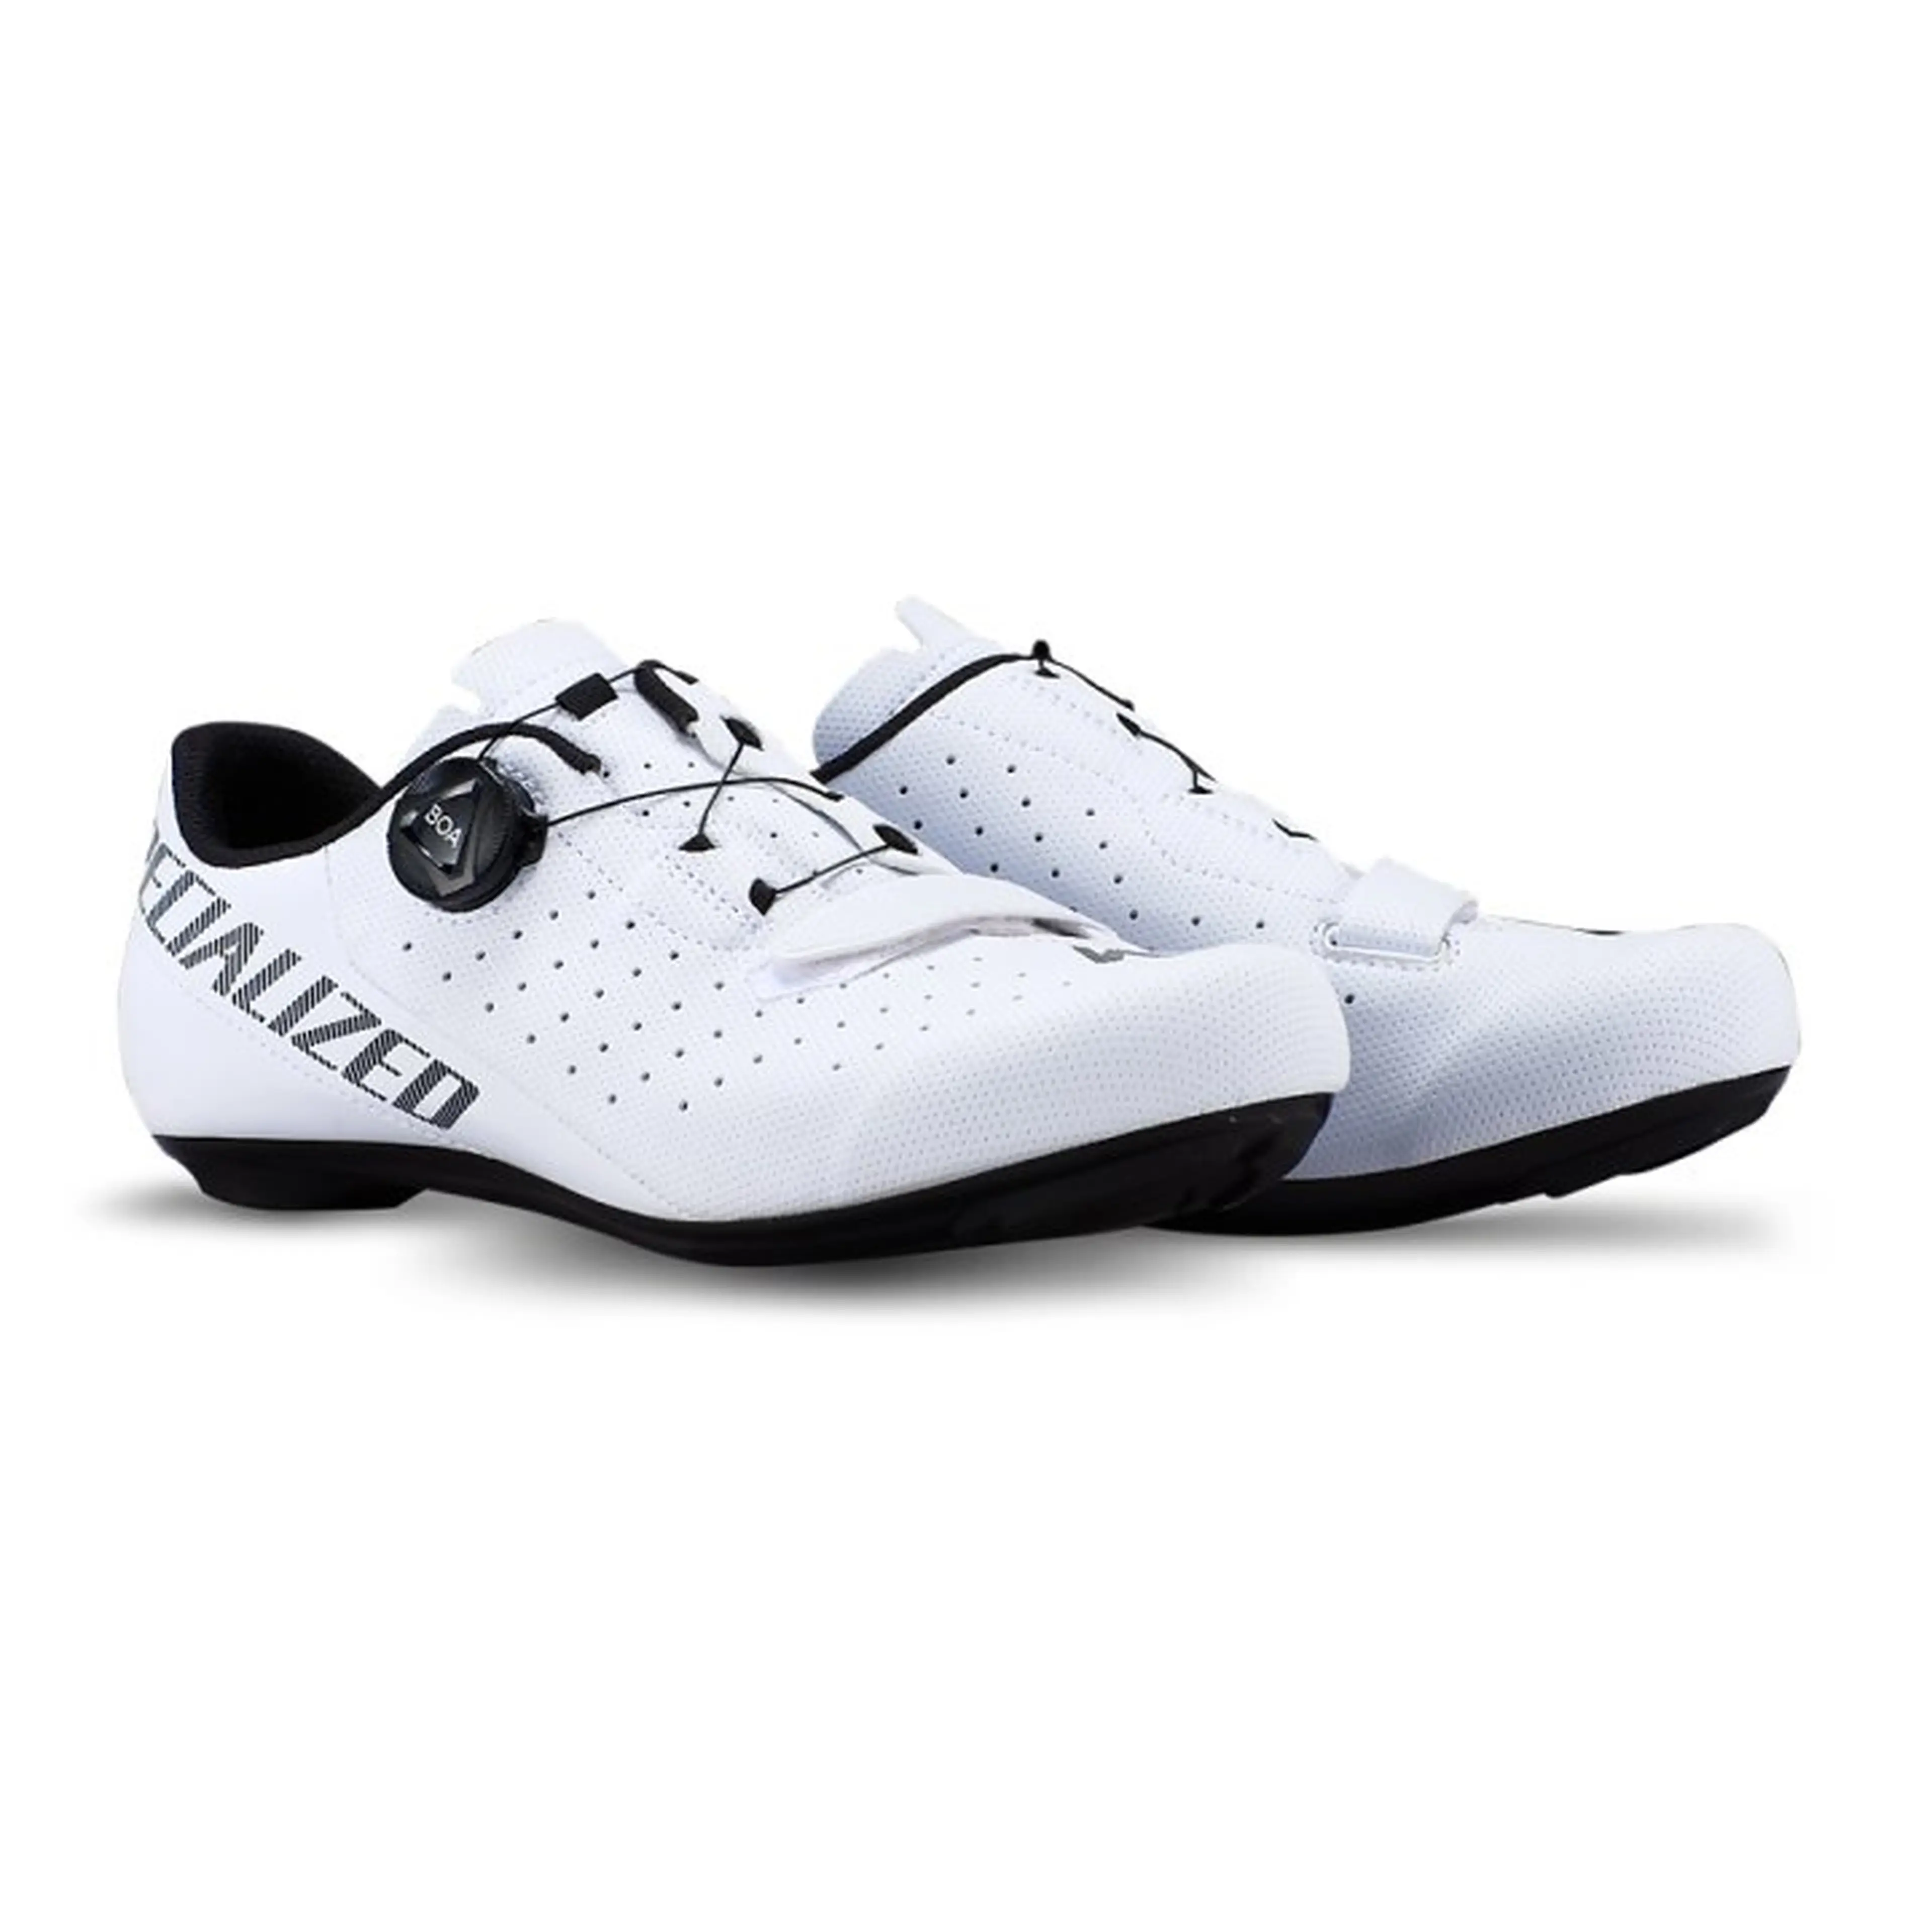 2. Pantofi ciclism Specialized Torch 1.0 Road